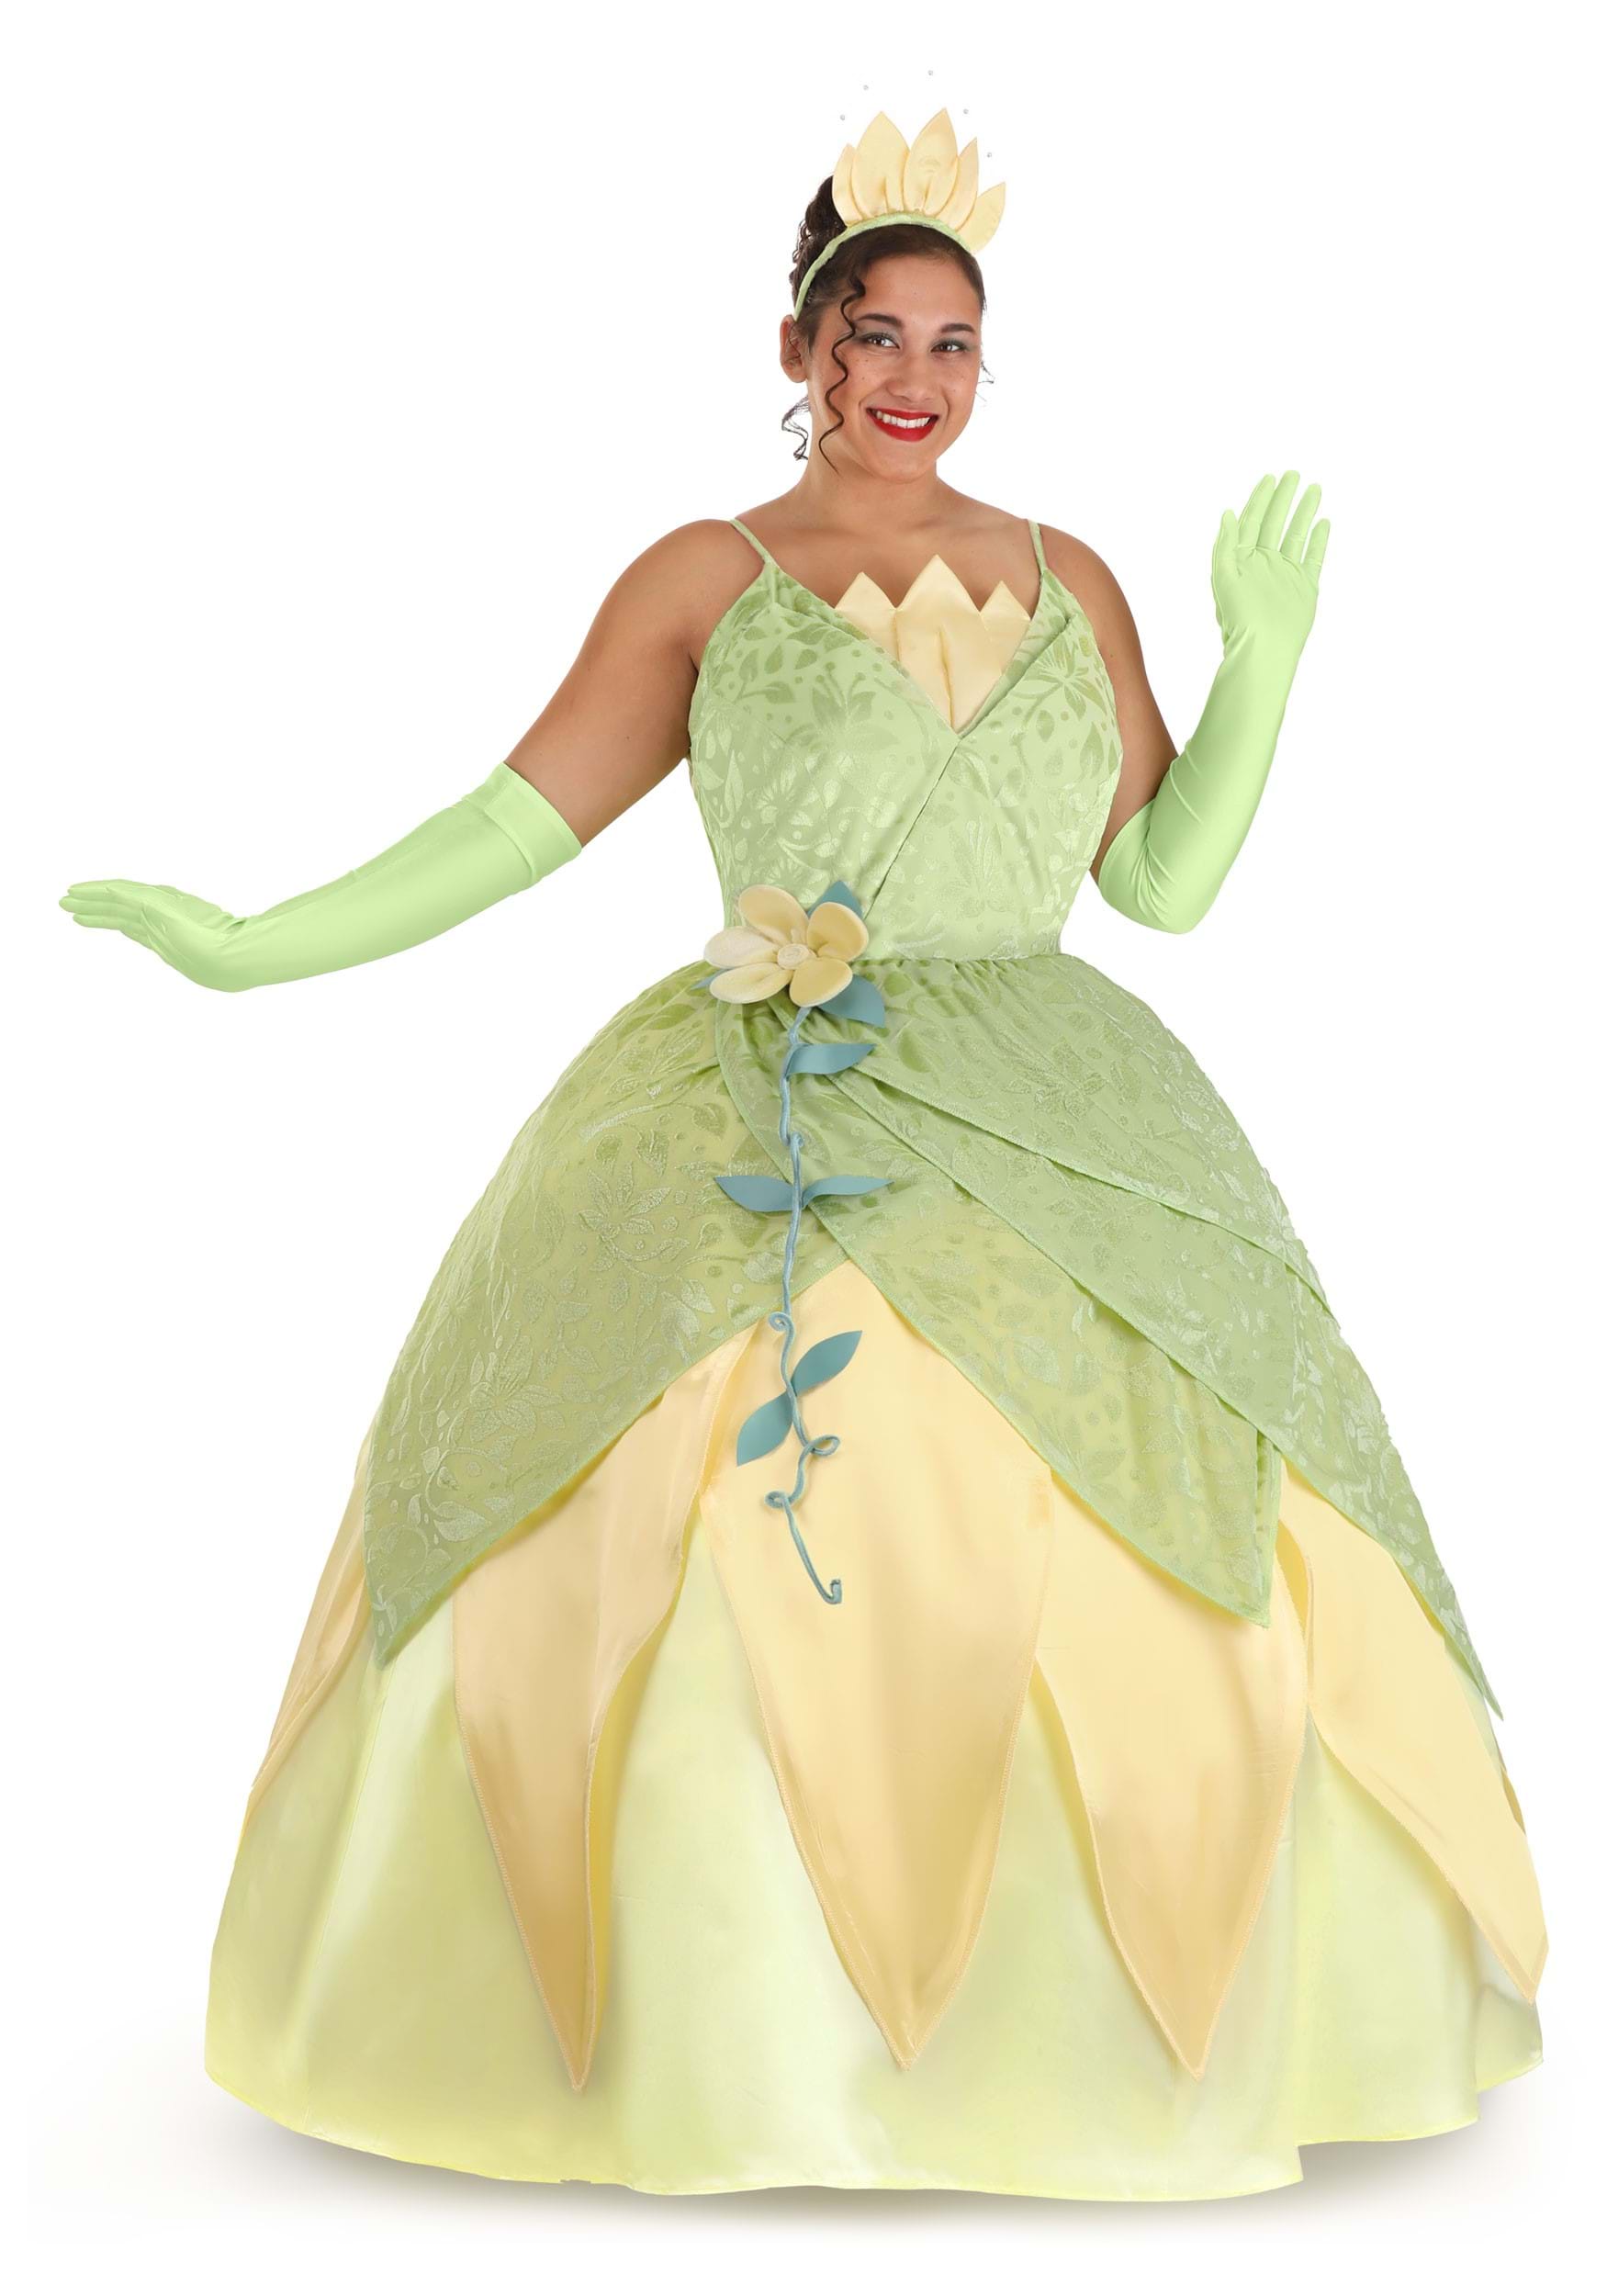 Photos - Fancy Dress Deluxe FUN Costumes Women's Plus Size  Disney Princess and the Frog Tiana C 